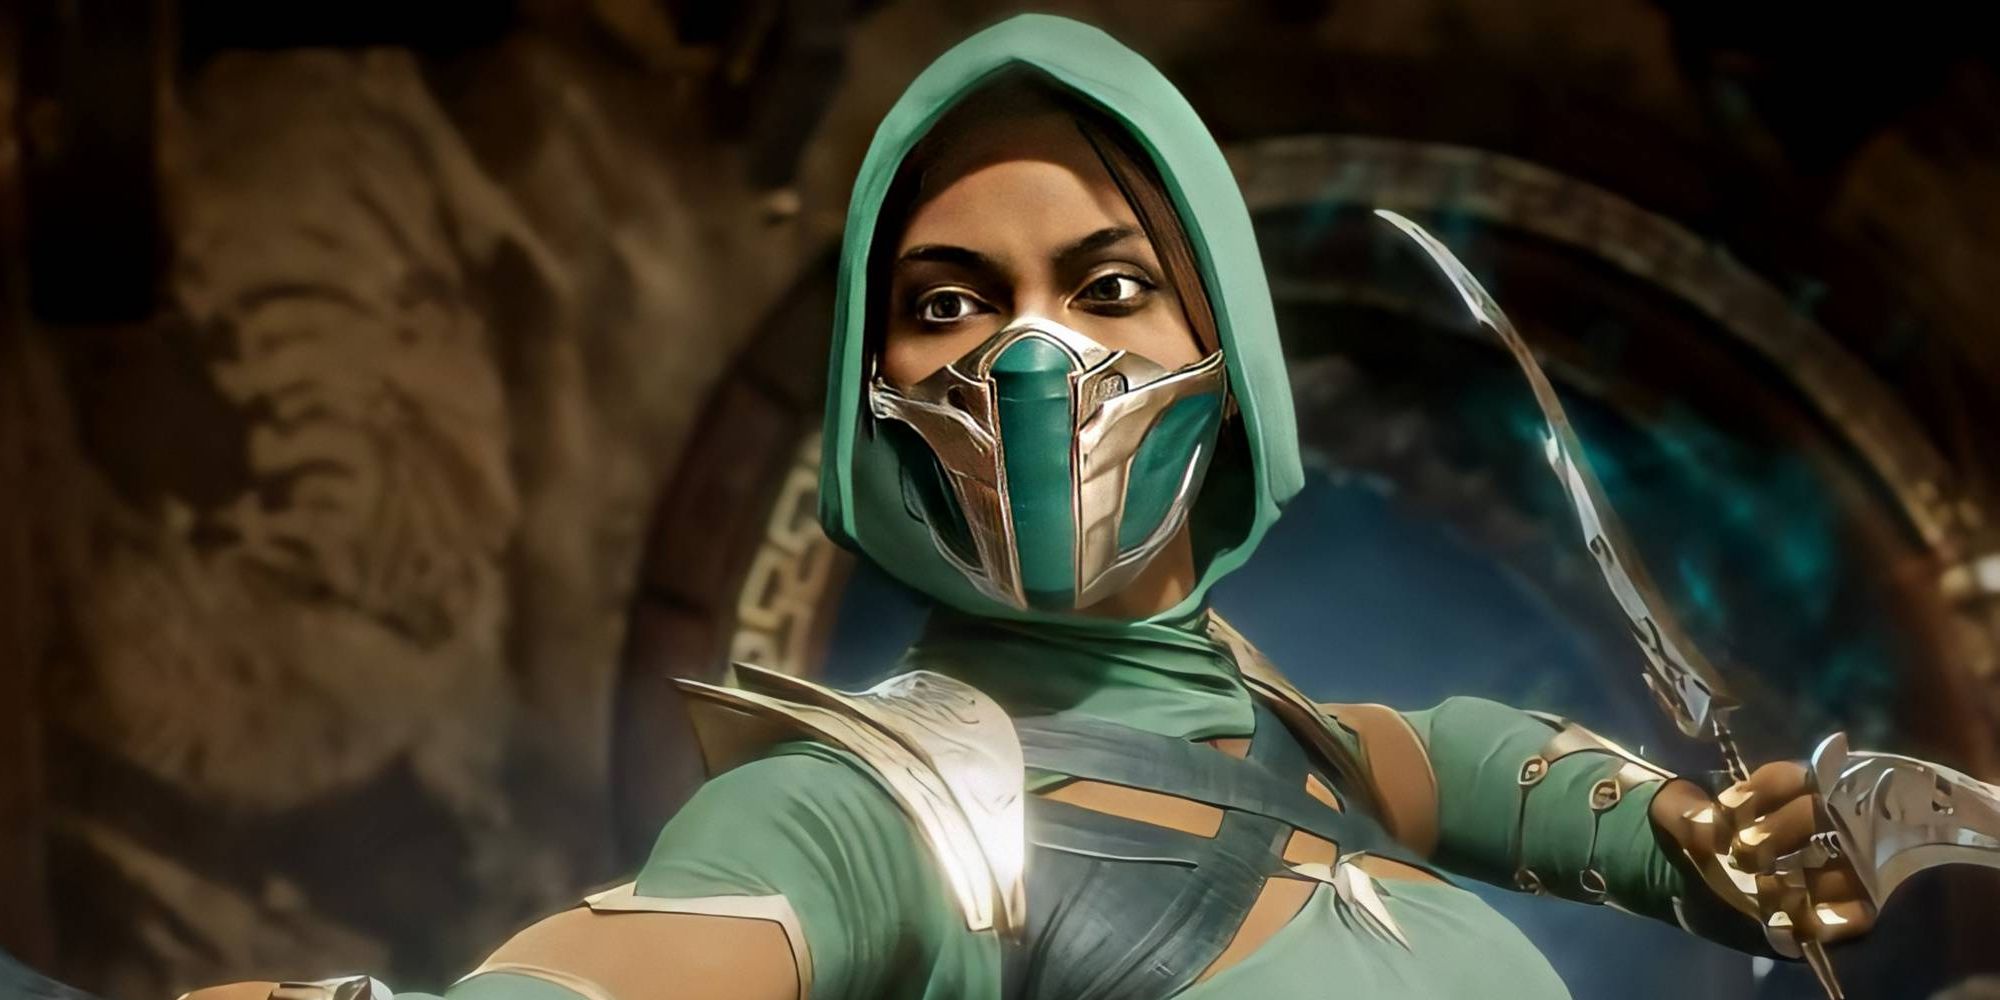 Jade, wearing a mask, readies her blade in her character intro in Mortal Kombat 11